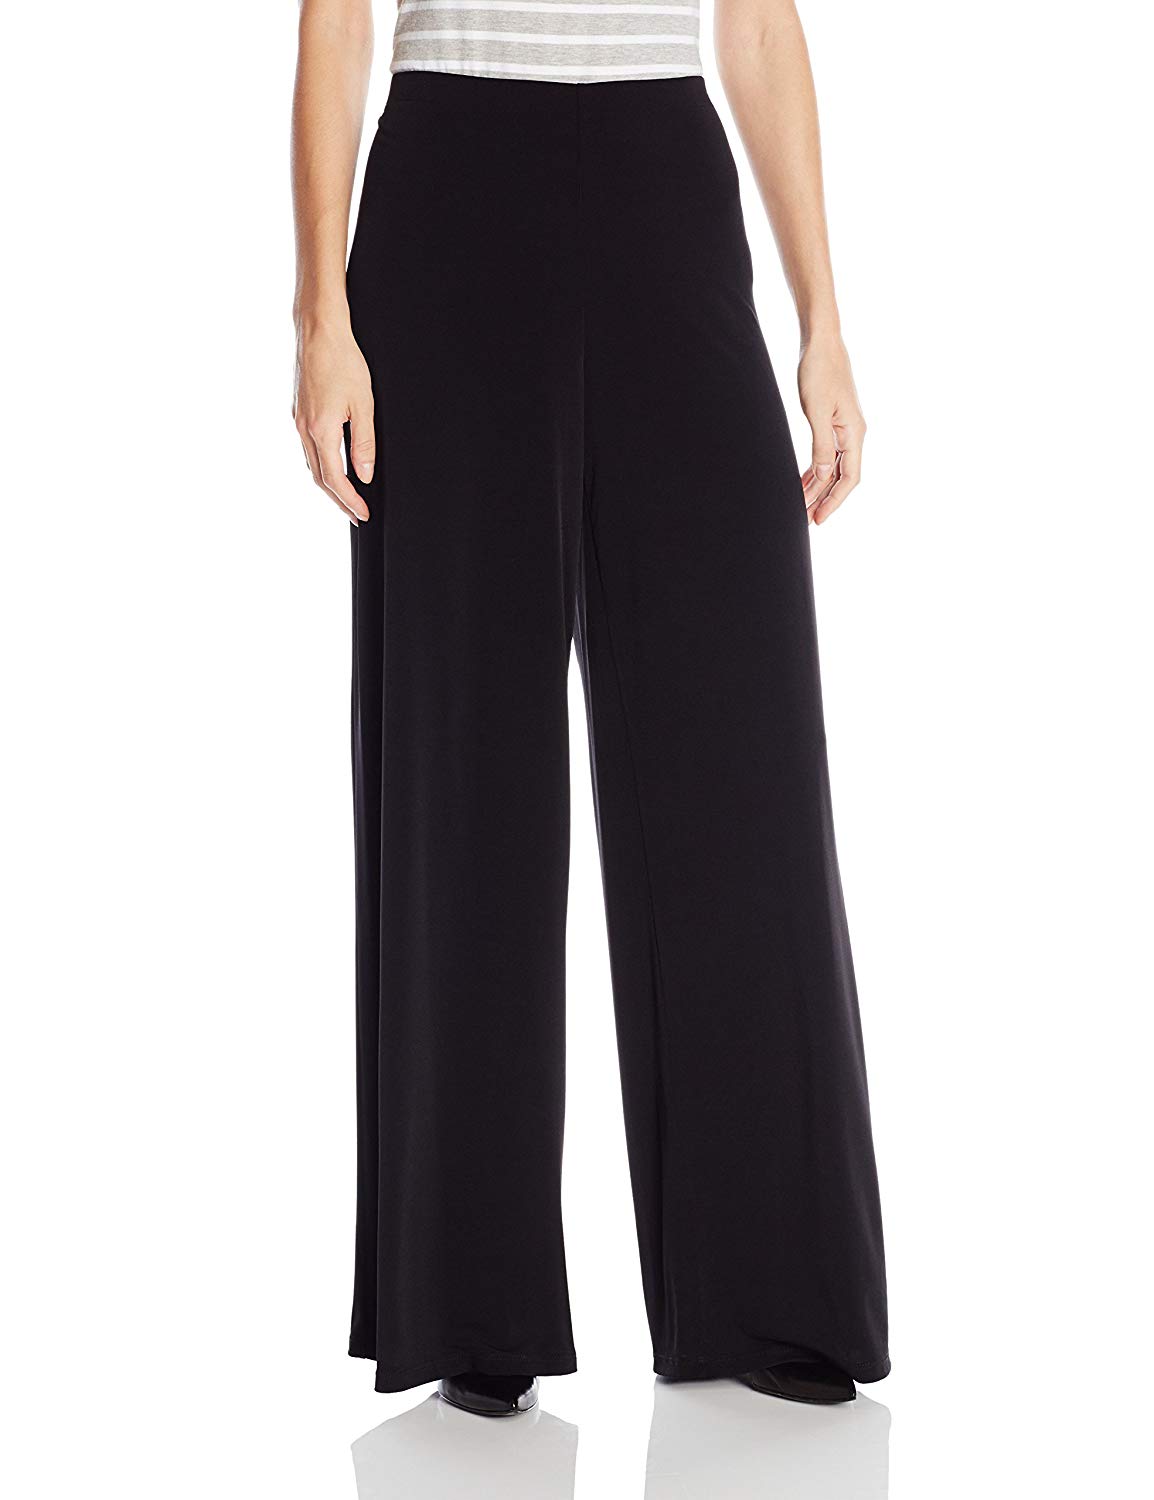 AGB Women's Soft Knit Palazzo Wide Leg Knit Pant,, Everyday Black, Size ...